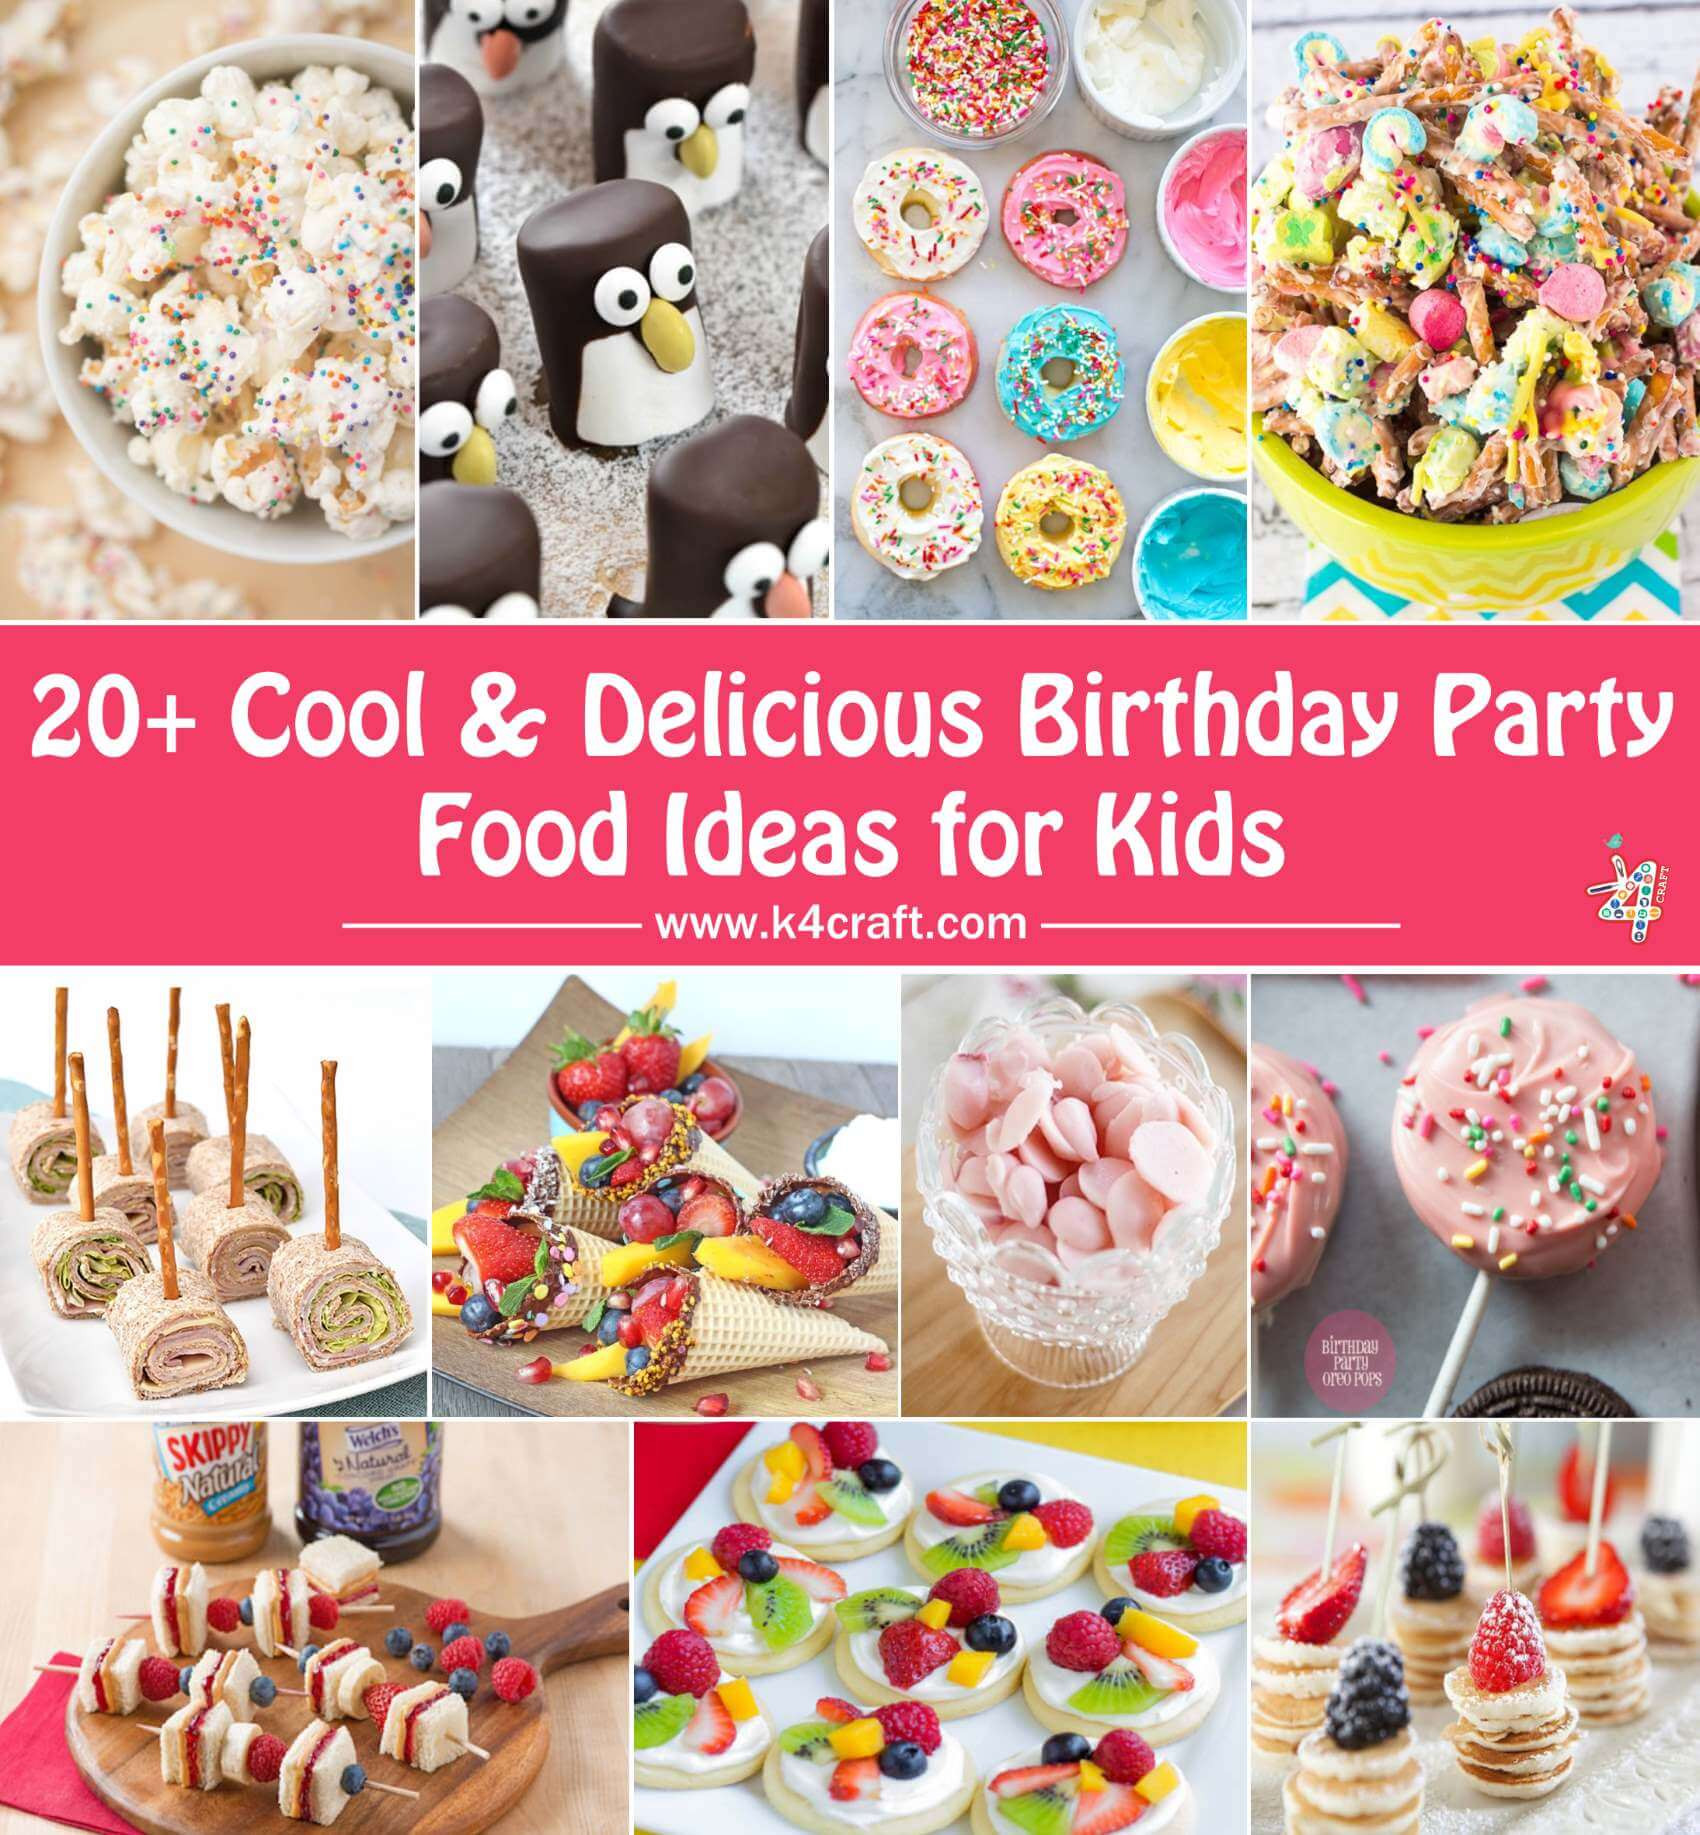 Kid Birthday Party Ideas
 Cool & Delicious Birthday Party Food Ideas for Kids • K4 Craft